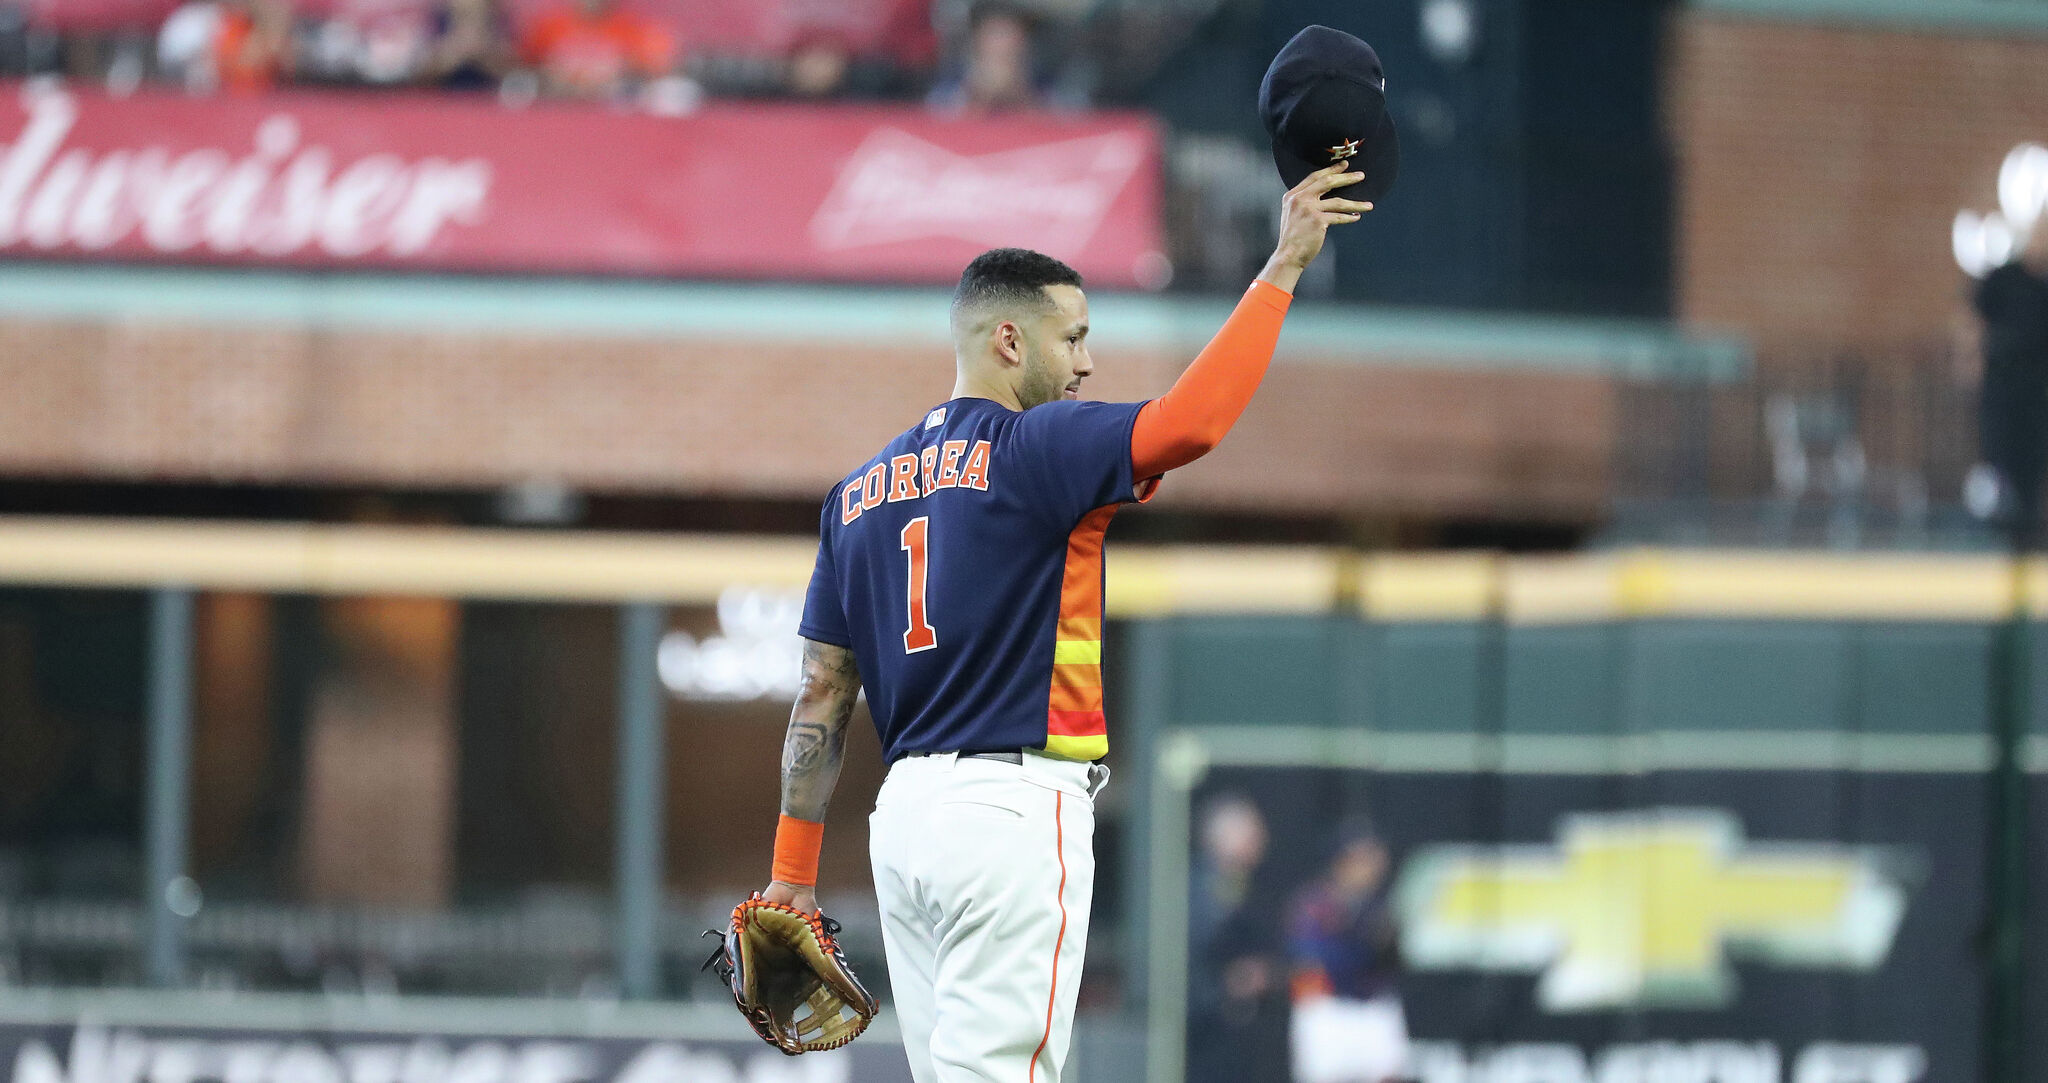 Smith: Will Carlos Correa's contract extension be this easy for